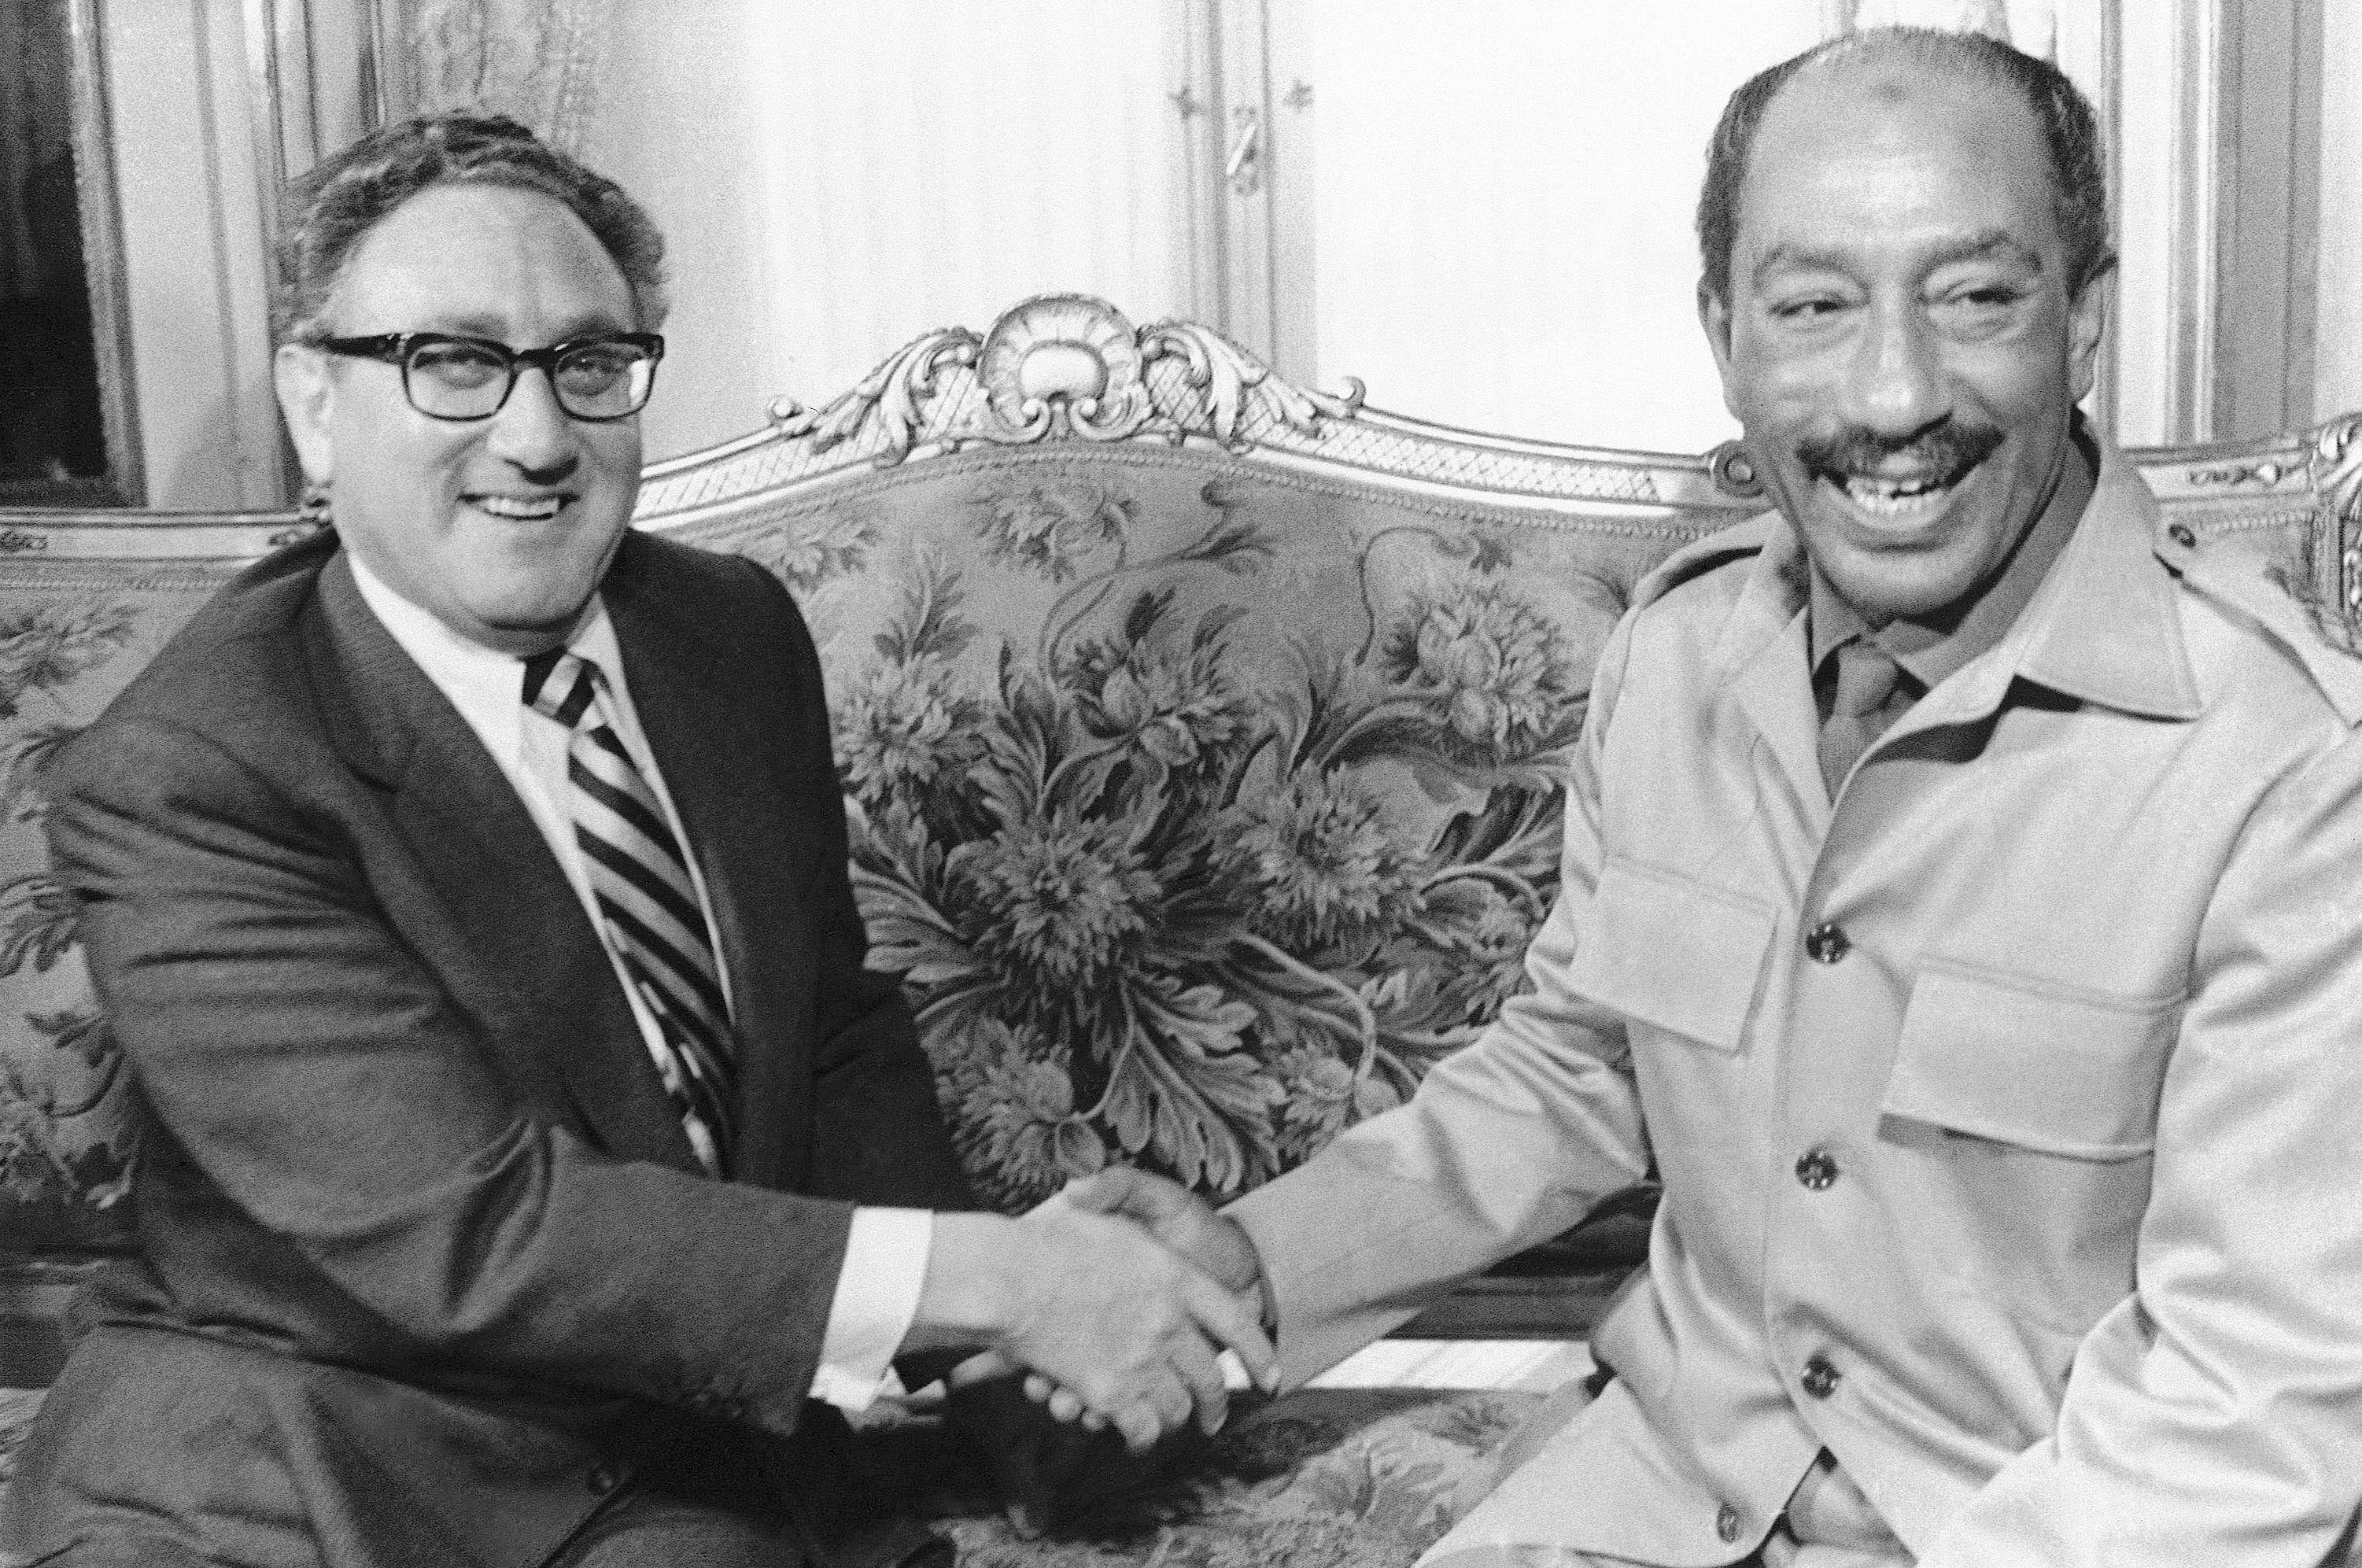 Kissinger meets with Egypt’s President Anwar Sadat at Tahira Palace in Cairo, Egypt to discuss the Mideast crisis, 7 November 1973.